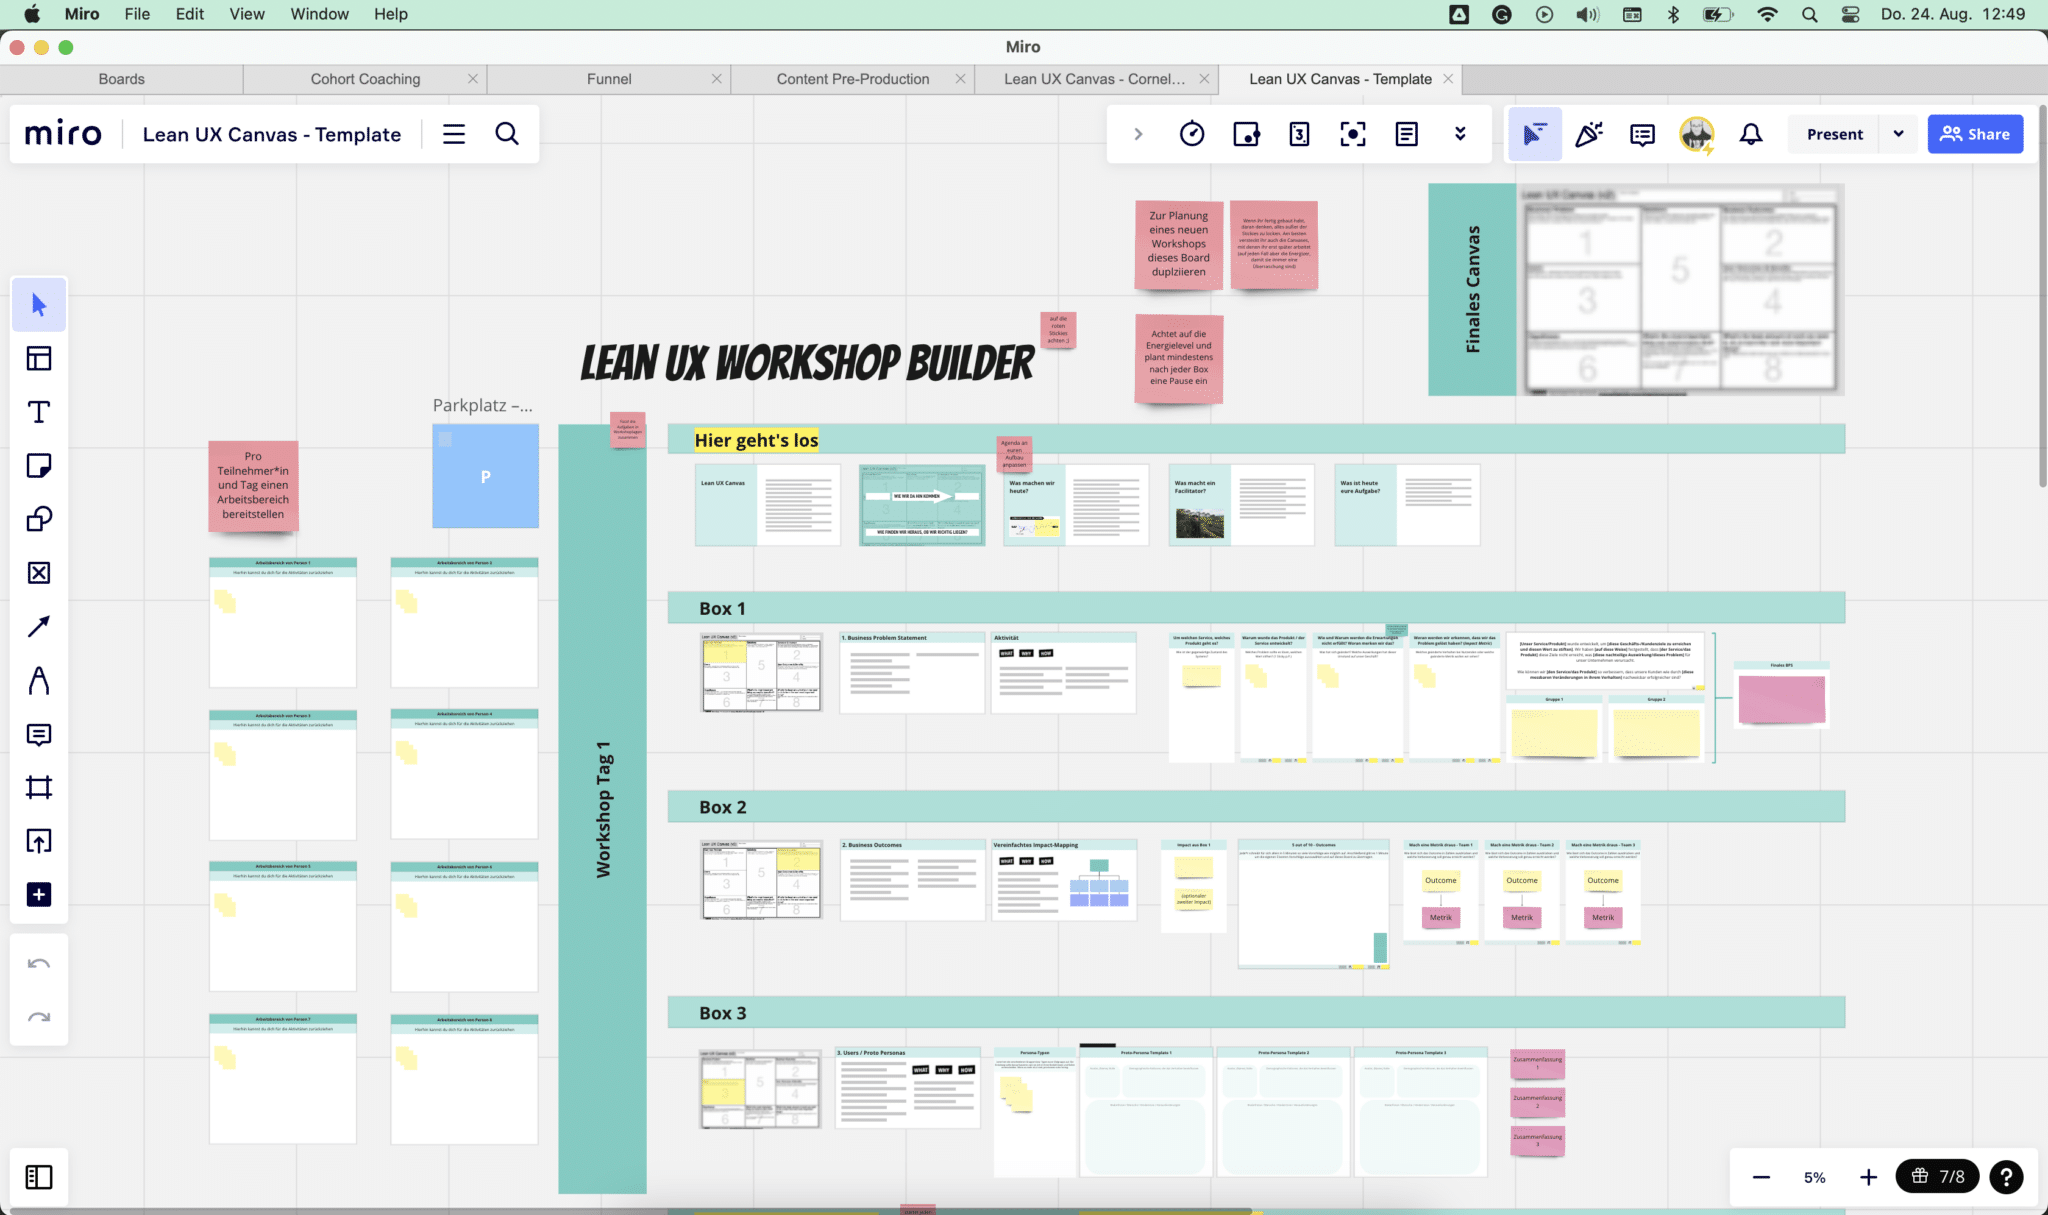 A screenhot of a miro board with my Lean UX Canvas template